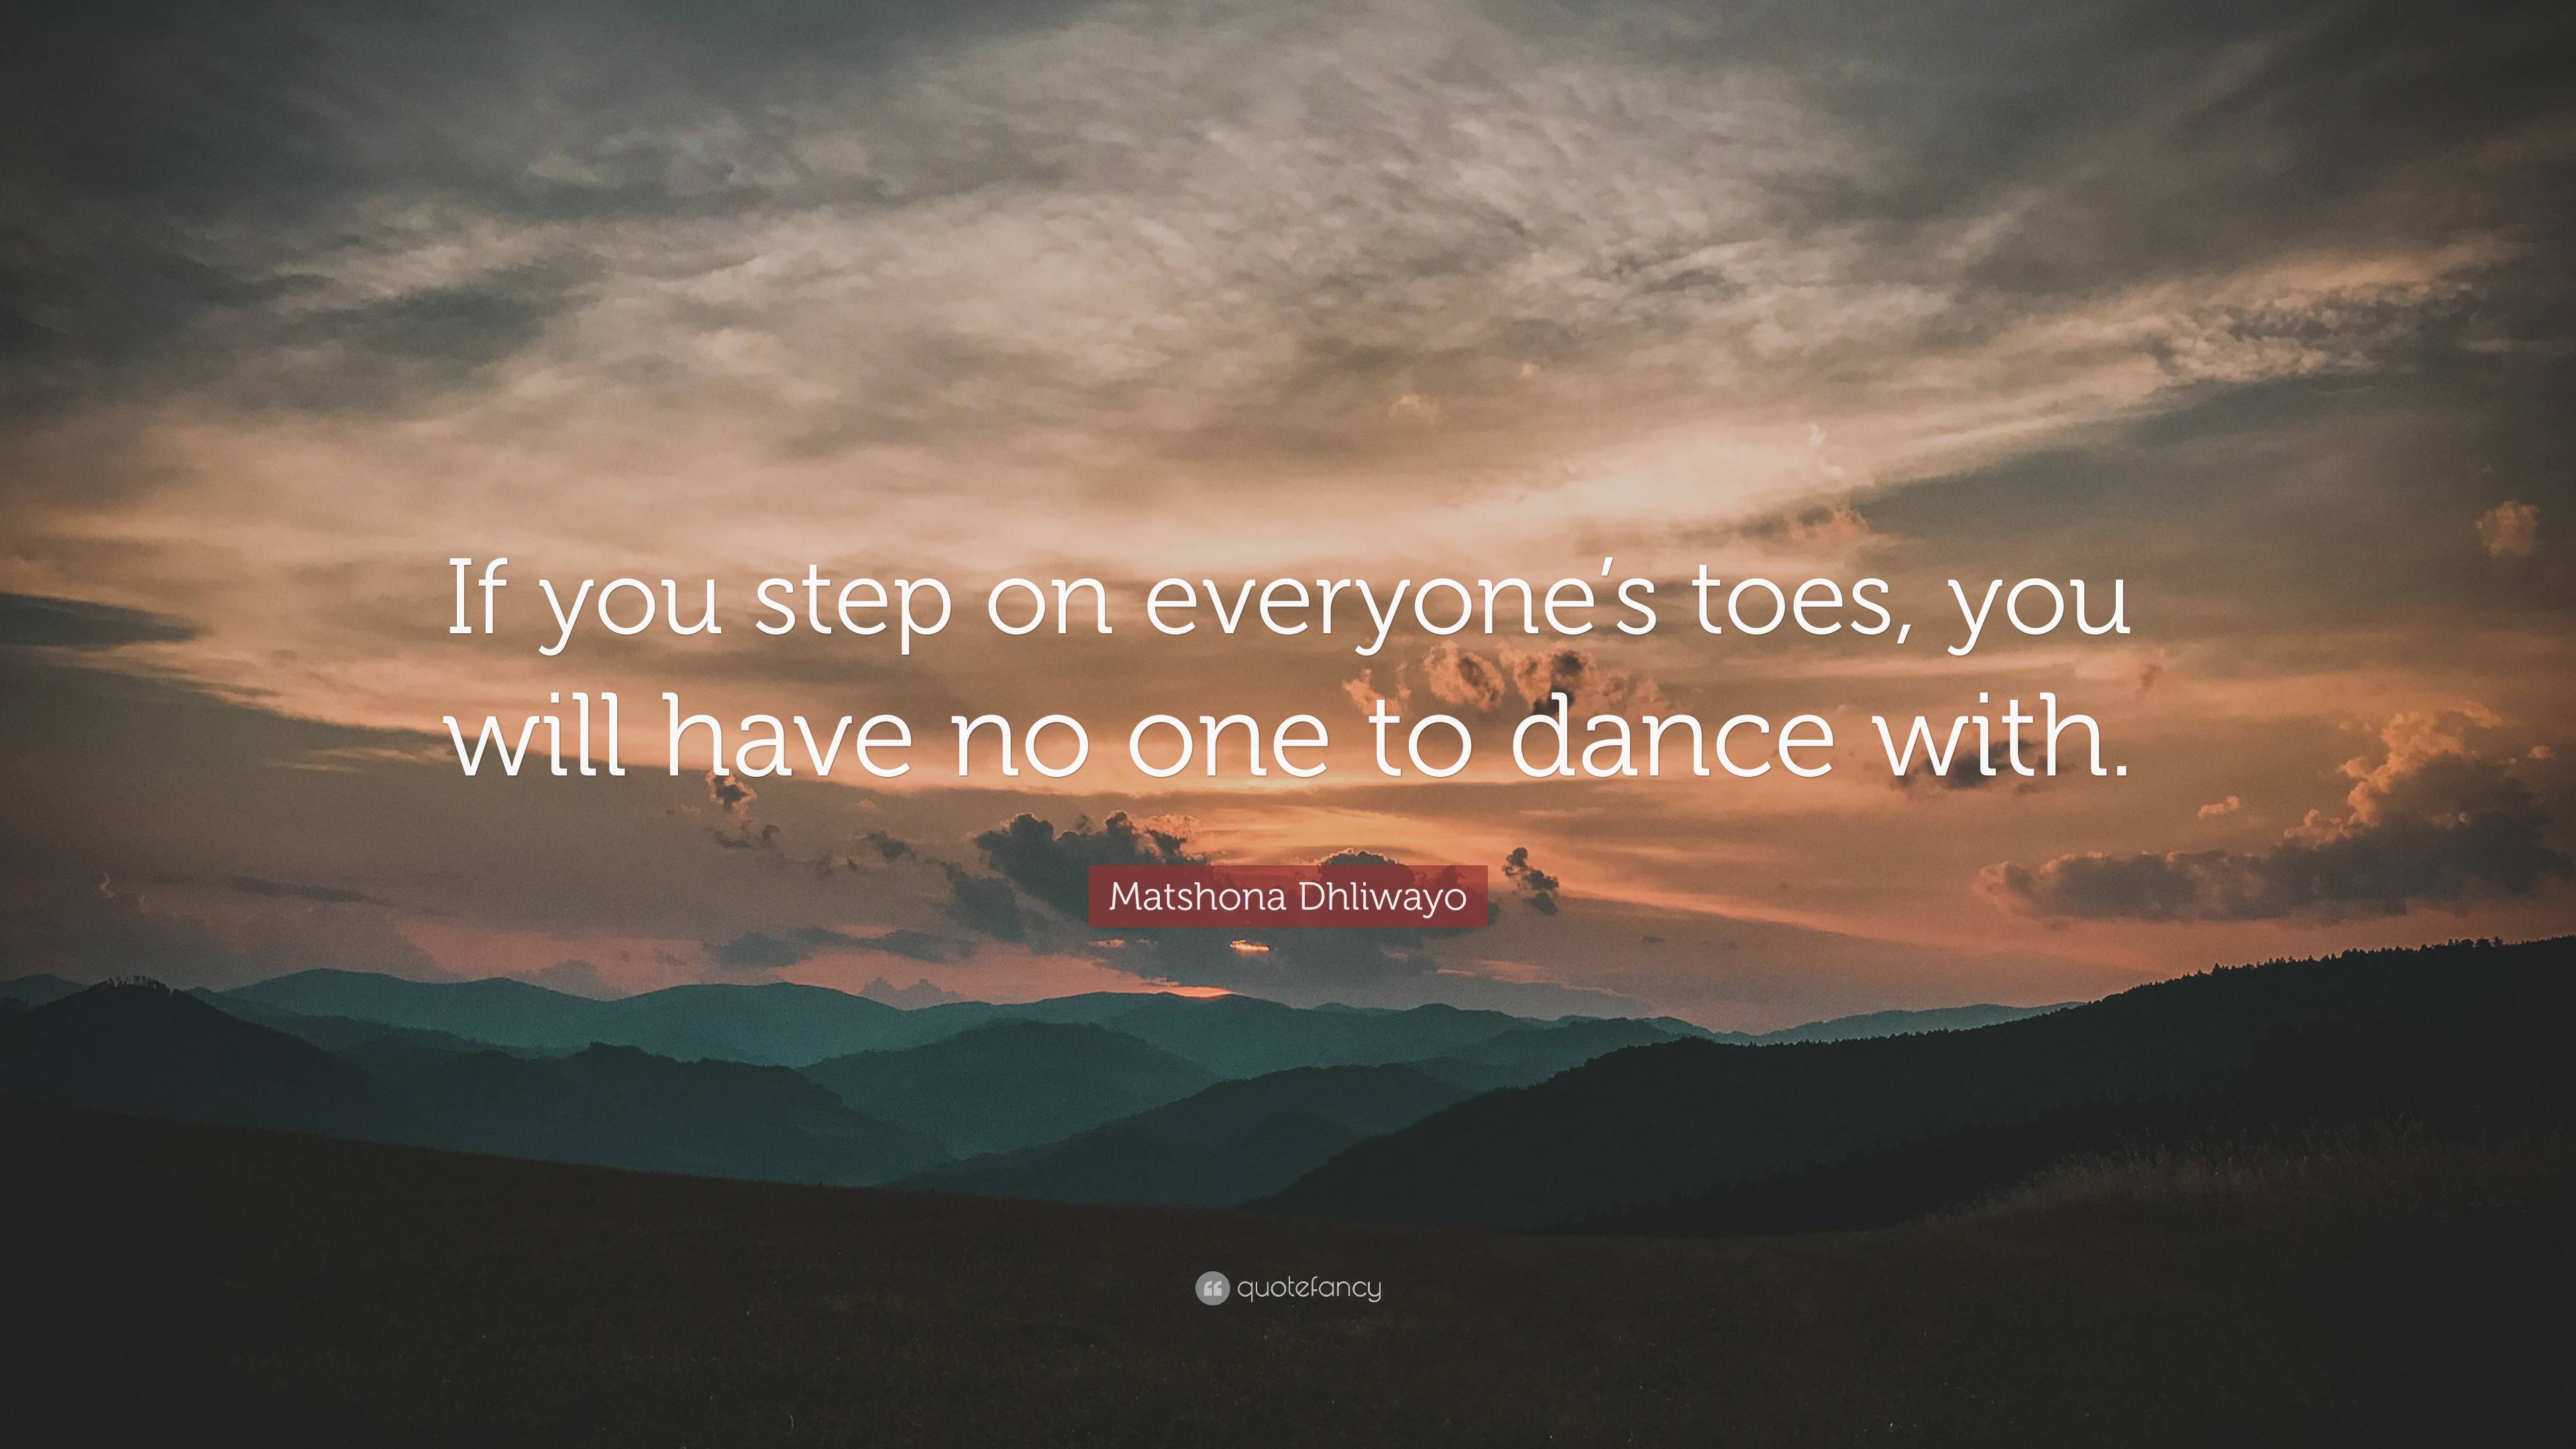 Matshona Dhliwayo Quote: “If you step on everyone’s toes, you will have ...